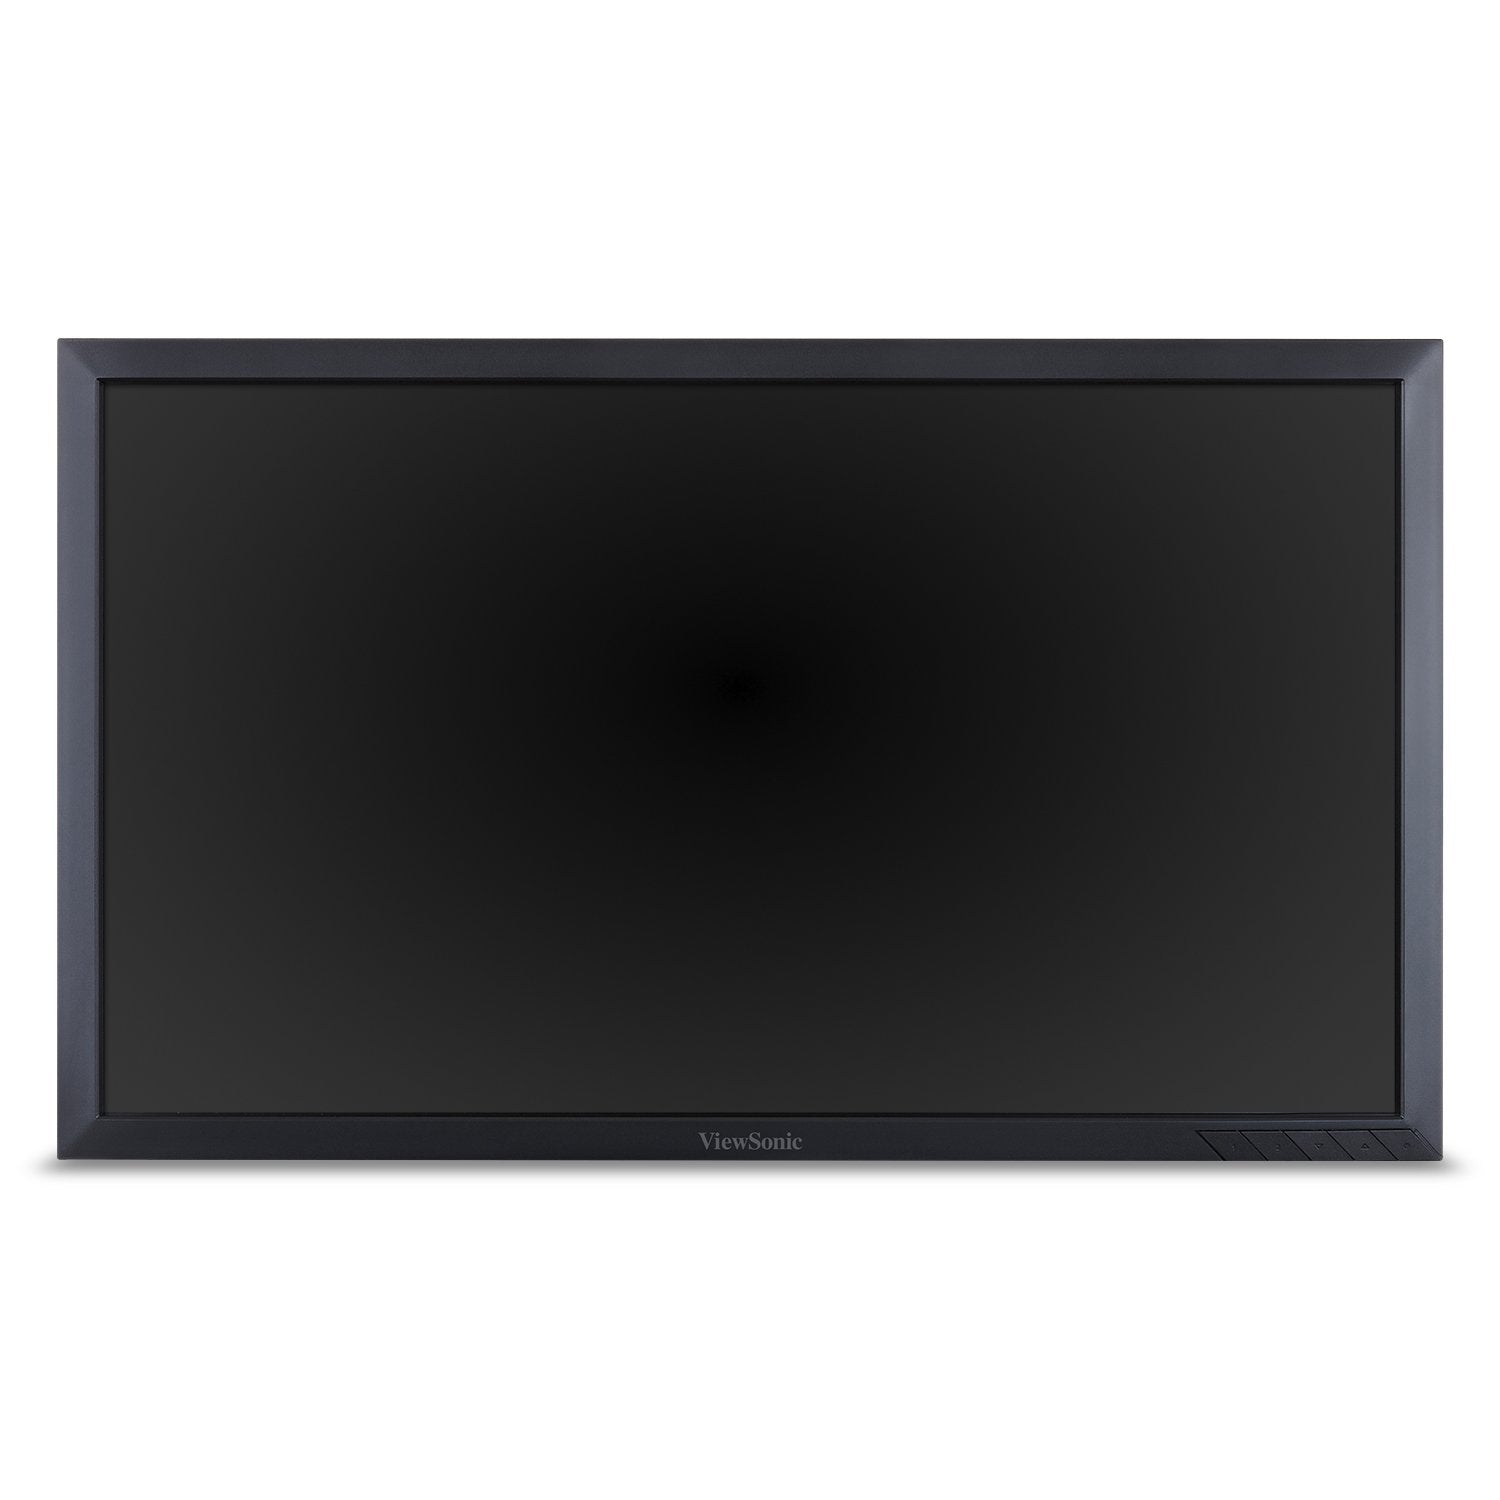 ViewSonic VG2249_H-S 22" LED LCD Monitor - Certified Refurbished